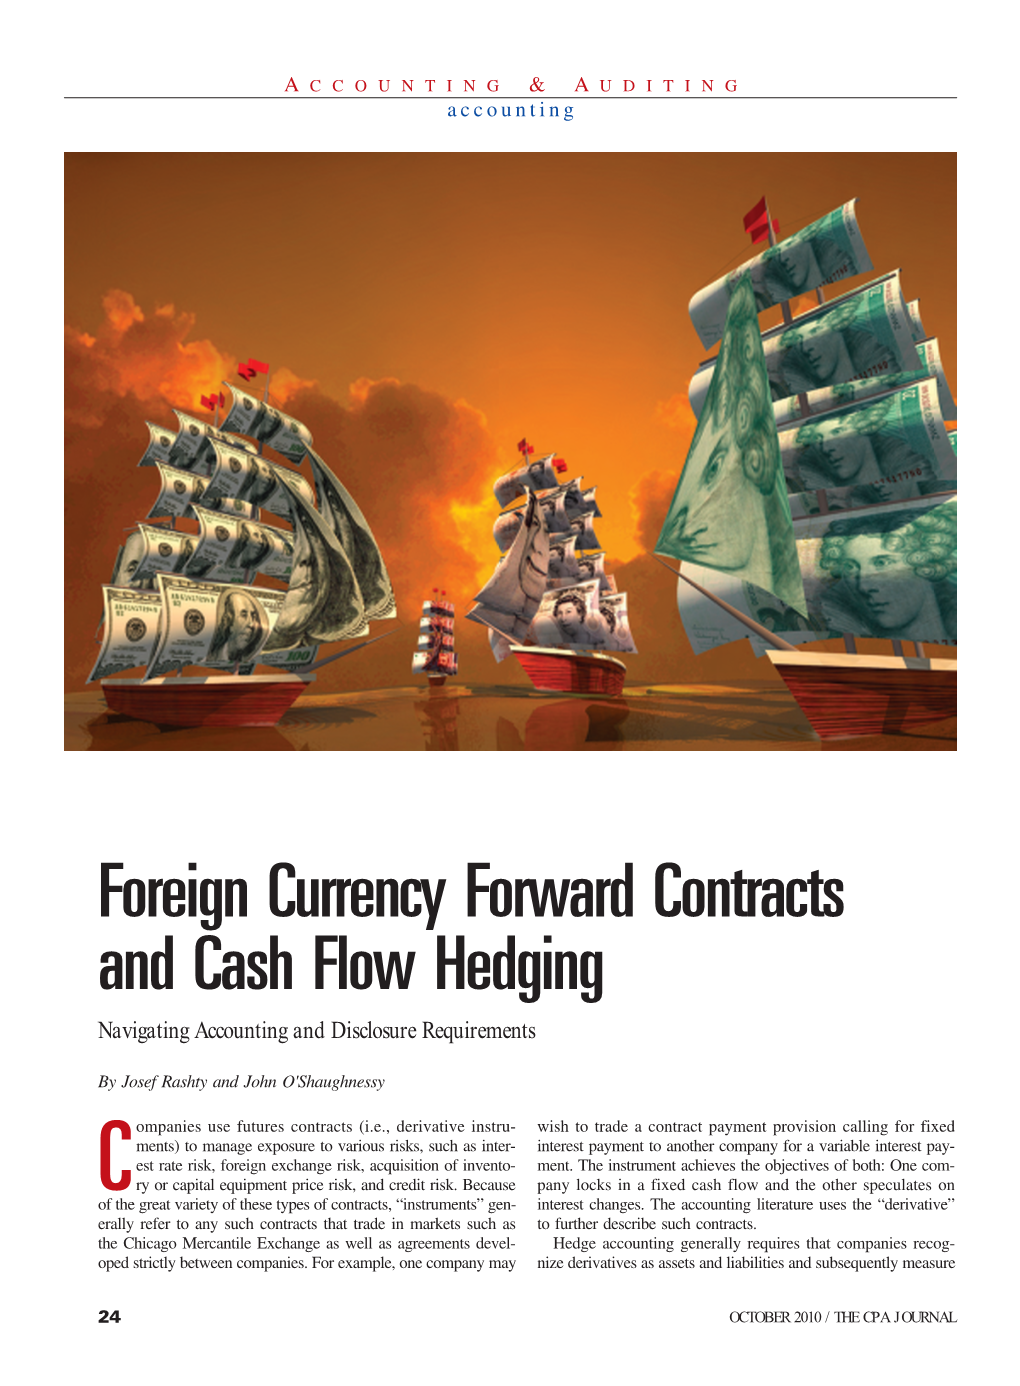 Foreign Currency Forward Contracts and Cash Flow Hedging Navigating Accounting and Disclosure Requirements